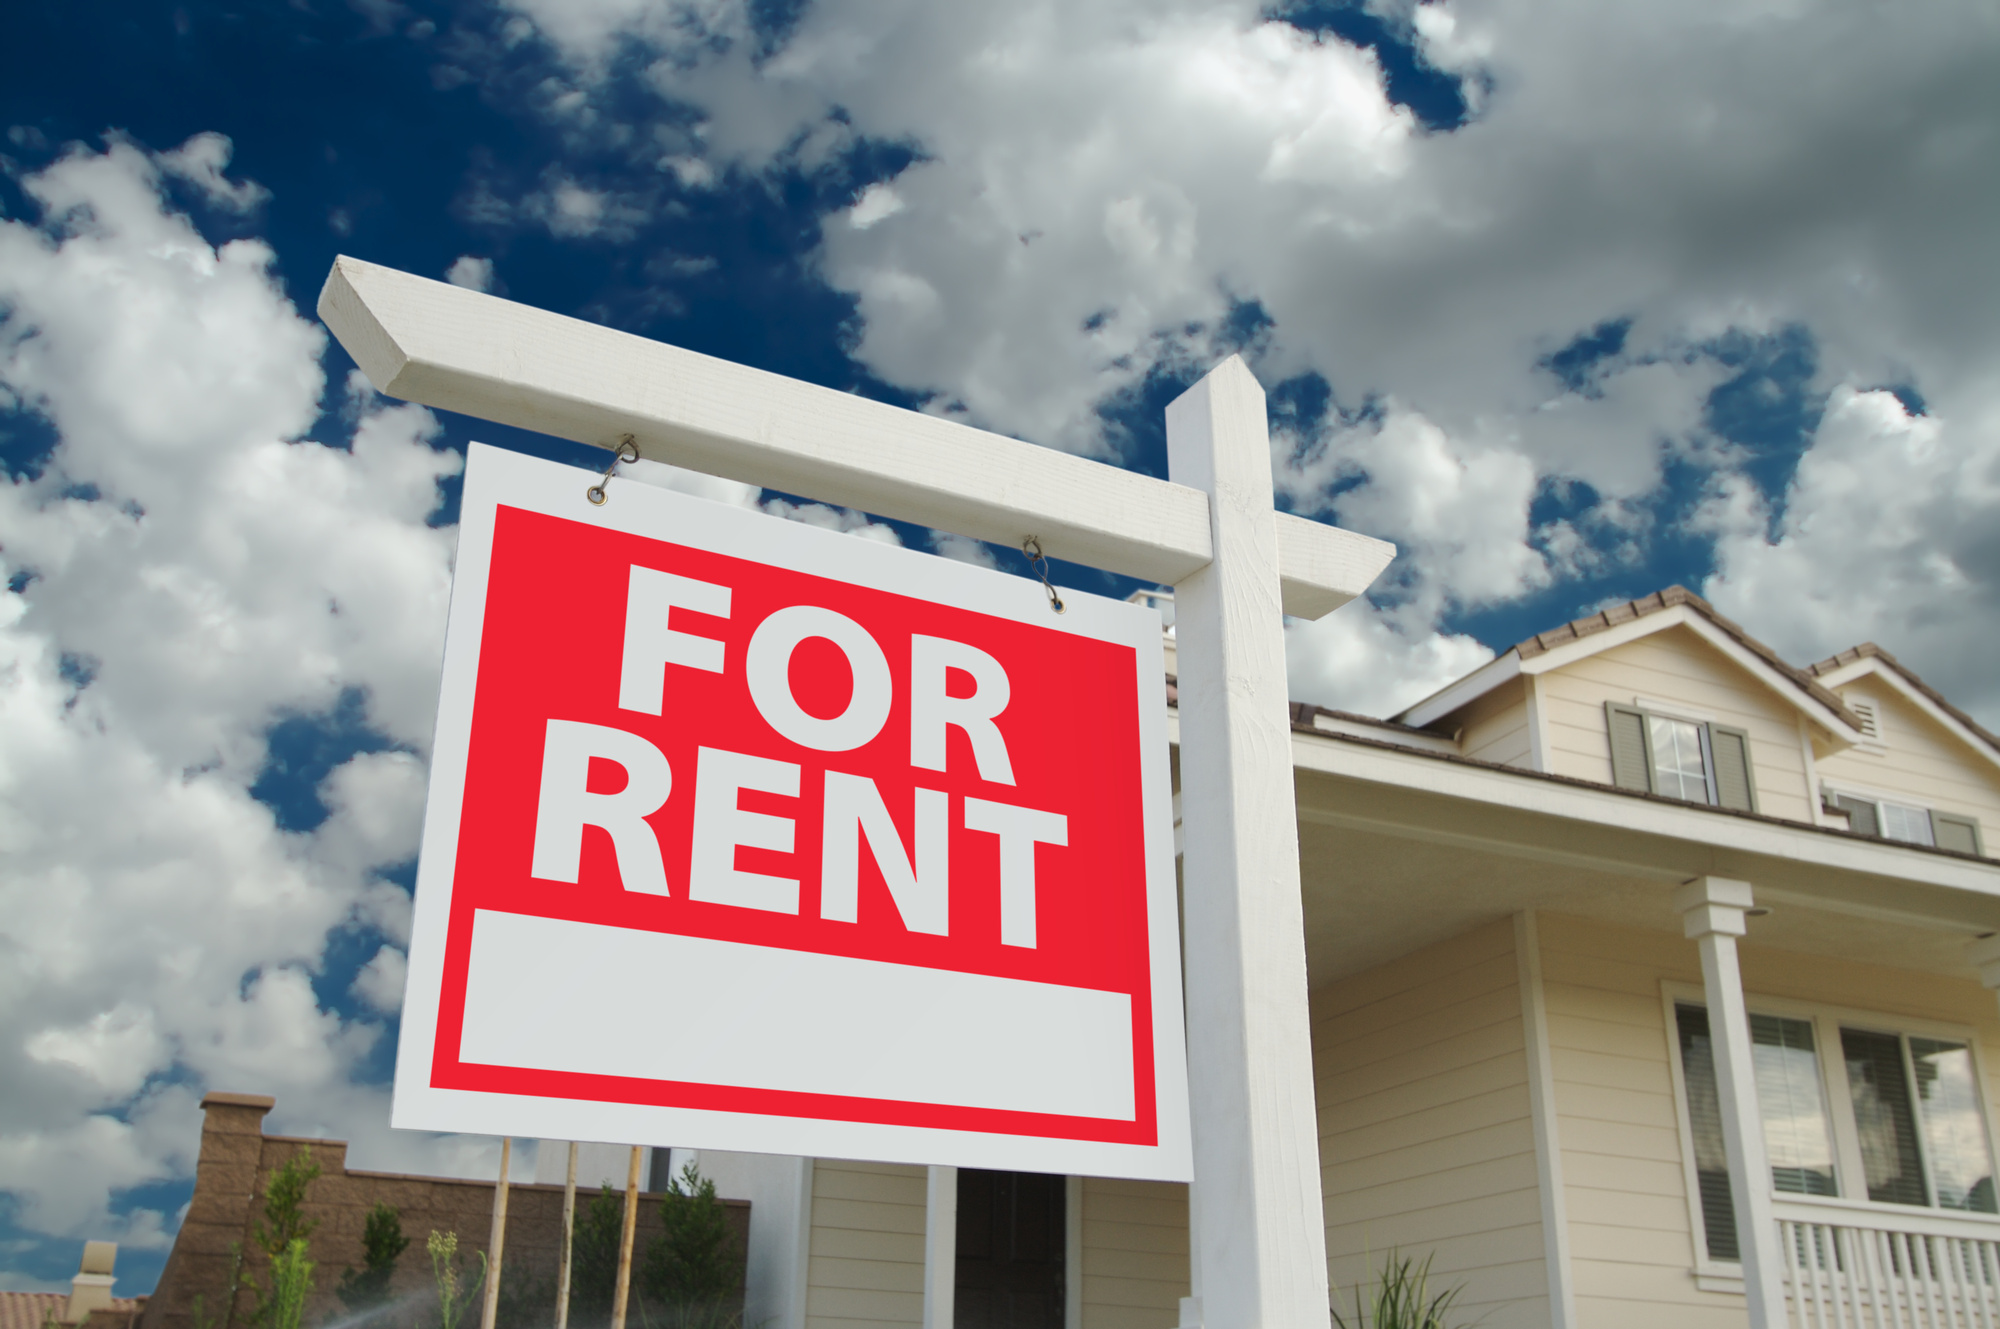 Why Is No One Renting from You?